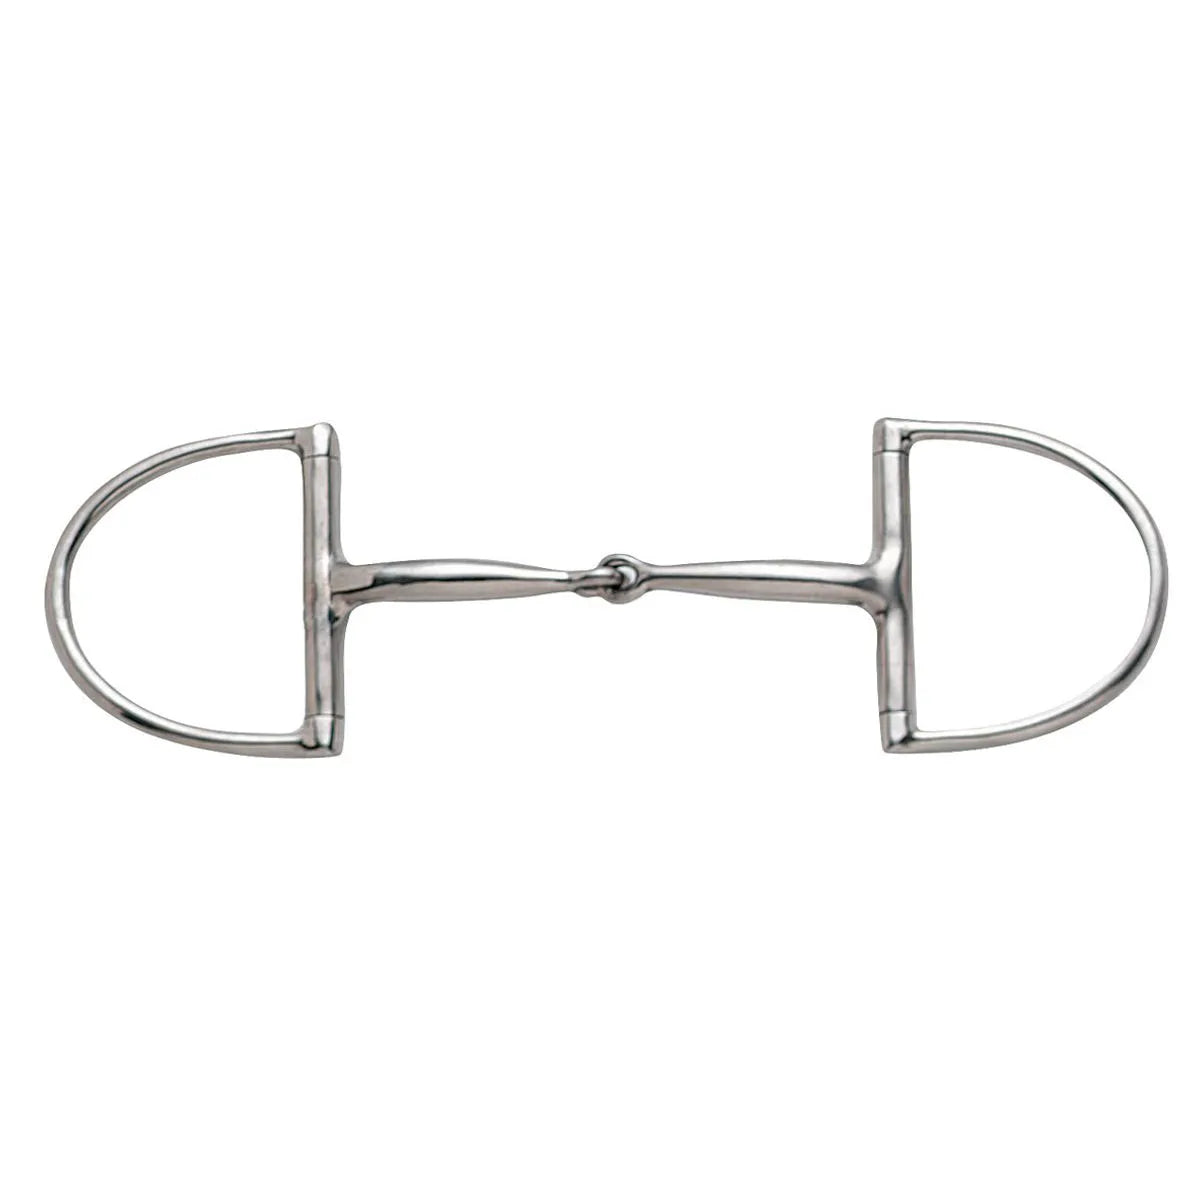 Centaur Pony Jointed Hunter Dee Ring specially sized for ponies